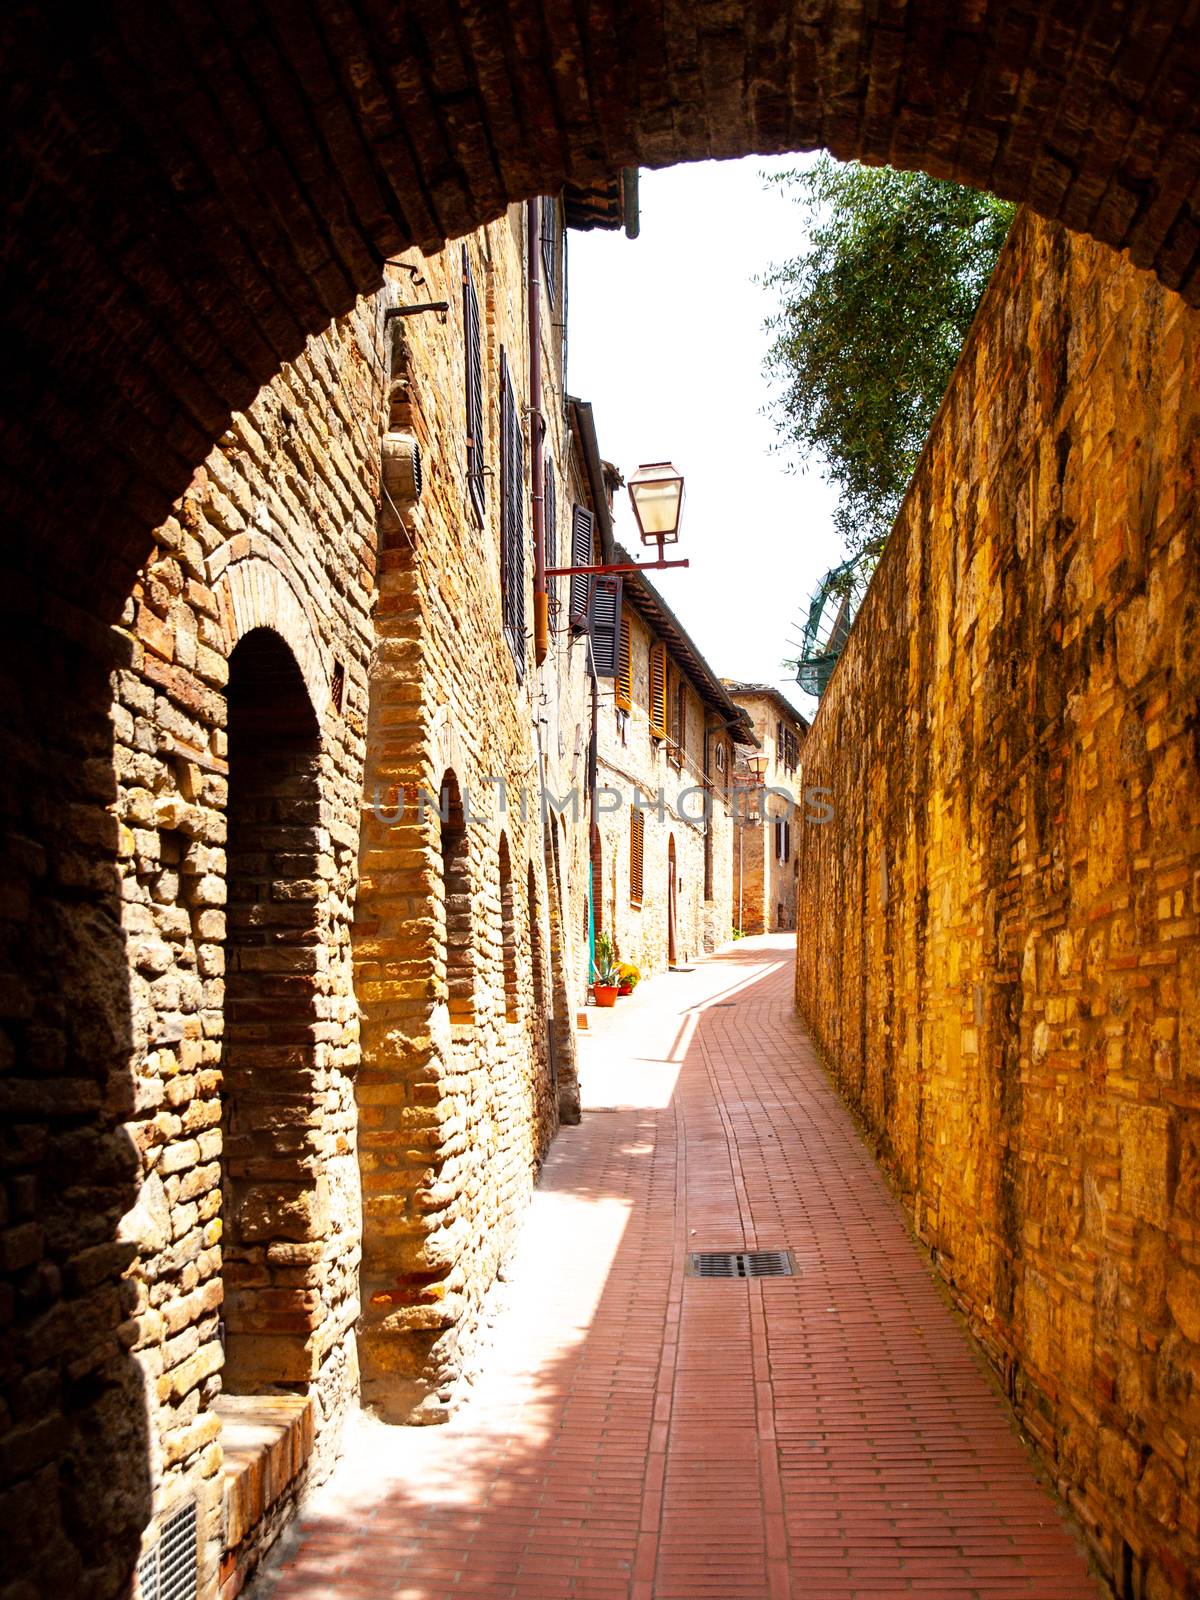 Picturesque medieval narrow street of San Gimignano old town, Tuscany, Italy.